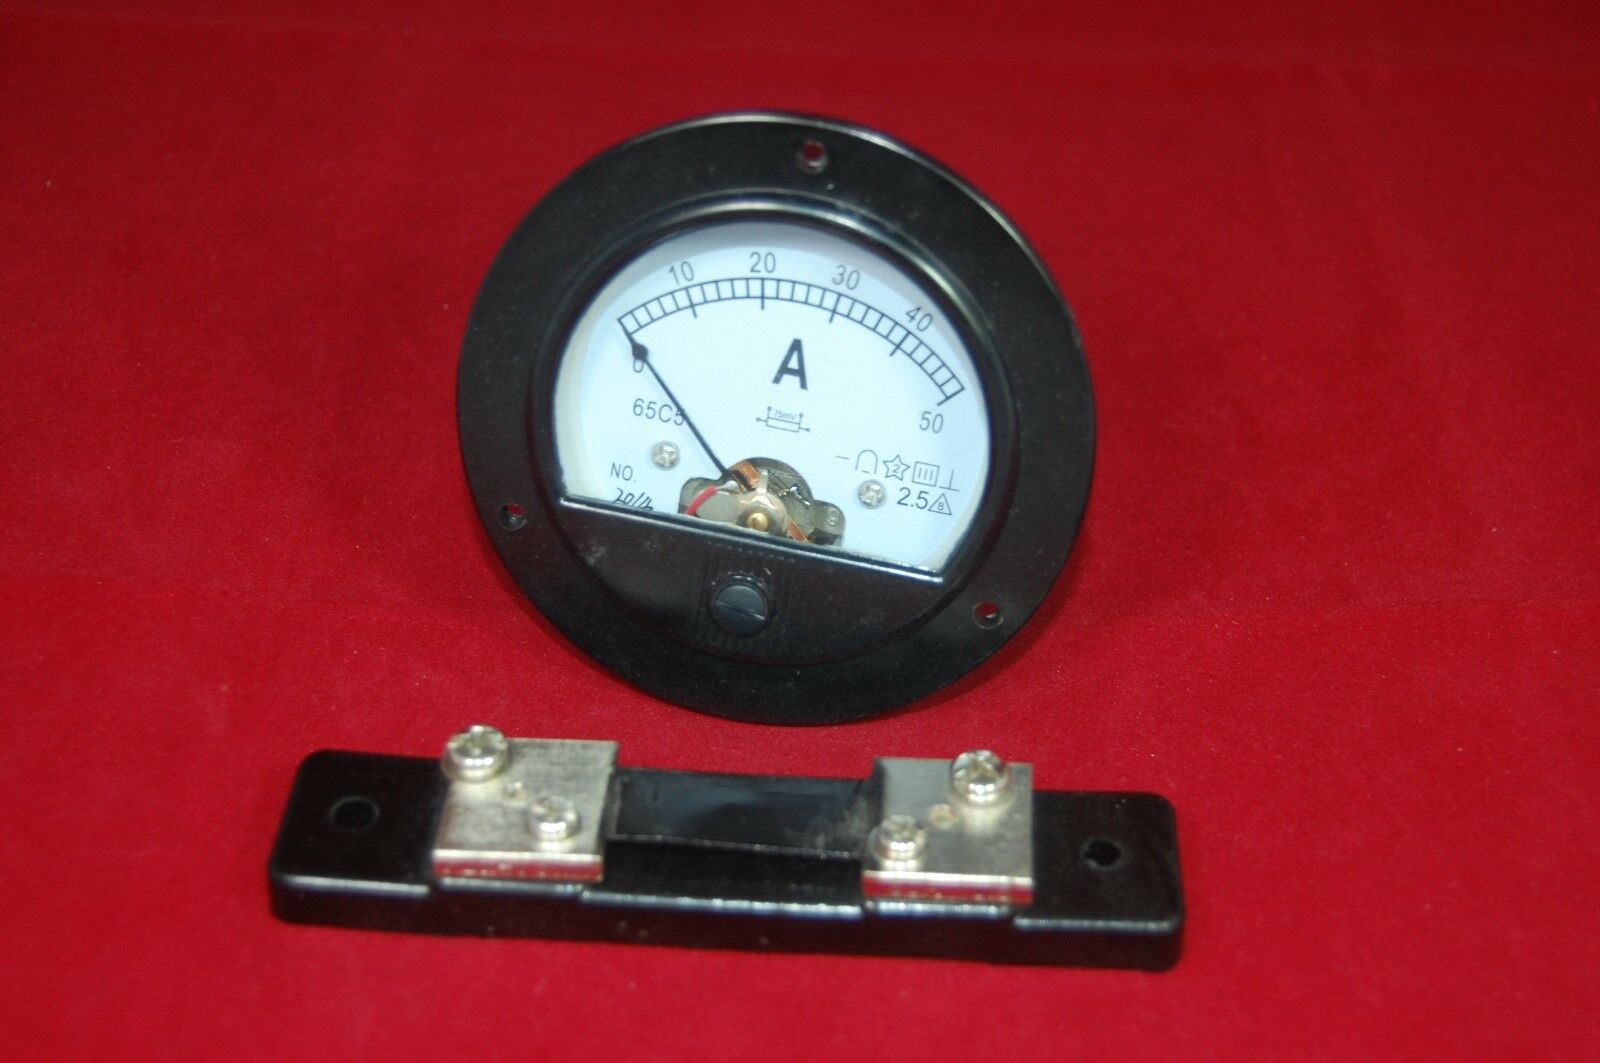 DC 0-50A Round Analog Ammeter Panel AMP Current Meter Dia. 90mm with shunt